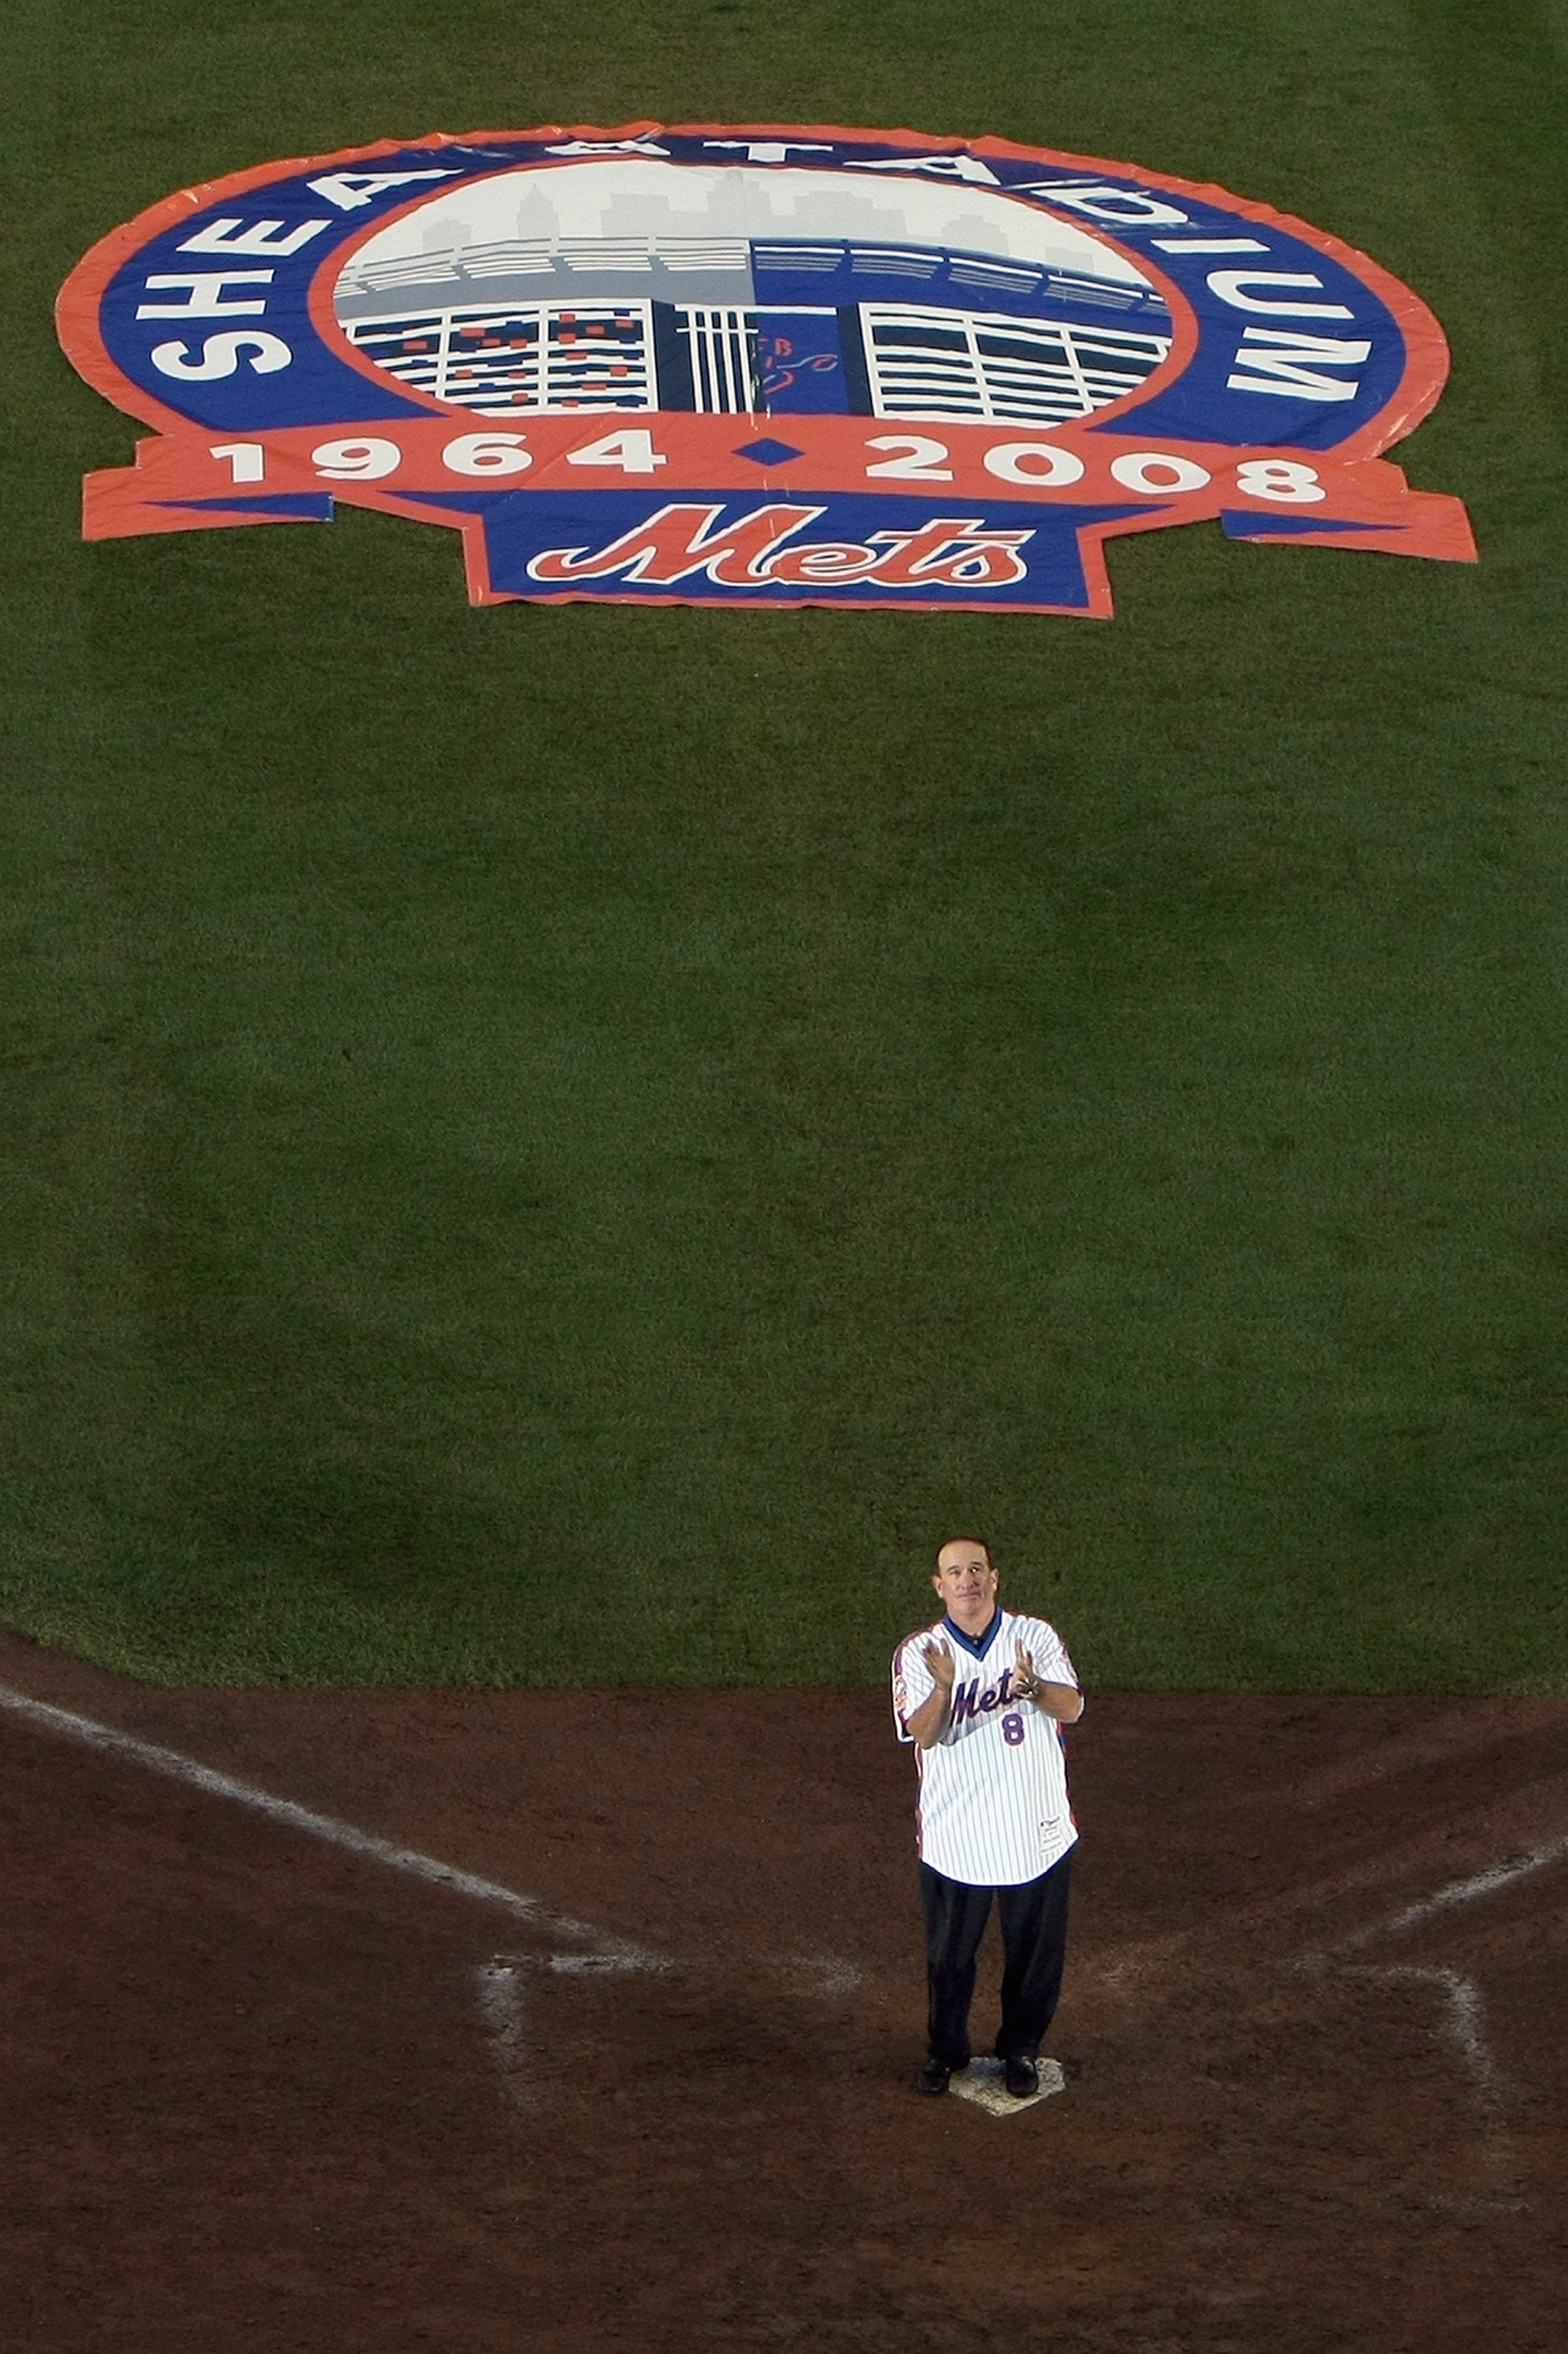 FLUSHING, NY - SEPTEMBER 28:  Former New York Mets player Gary Carter stands at home plate during post game ceremonies after playing the Florida Marlins in the last regular season baseball game ever played in Shea Stadium on September 28, 2008 in the Flus